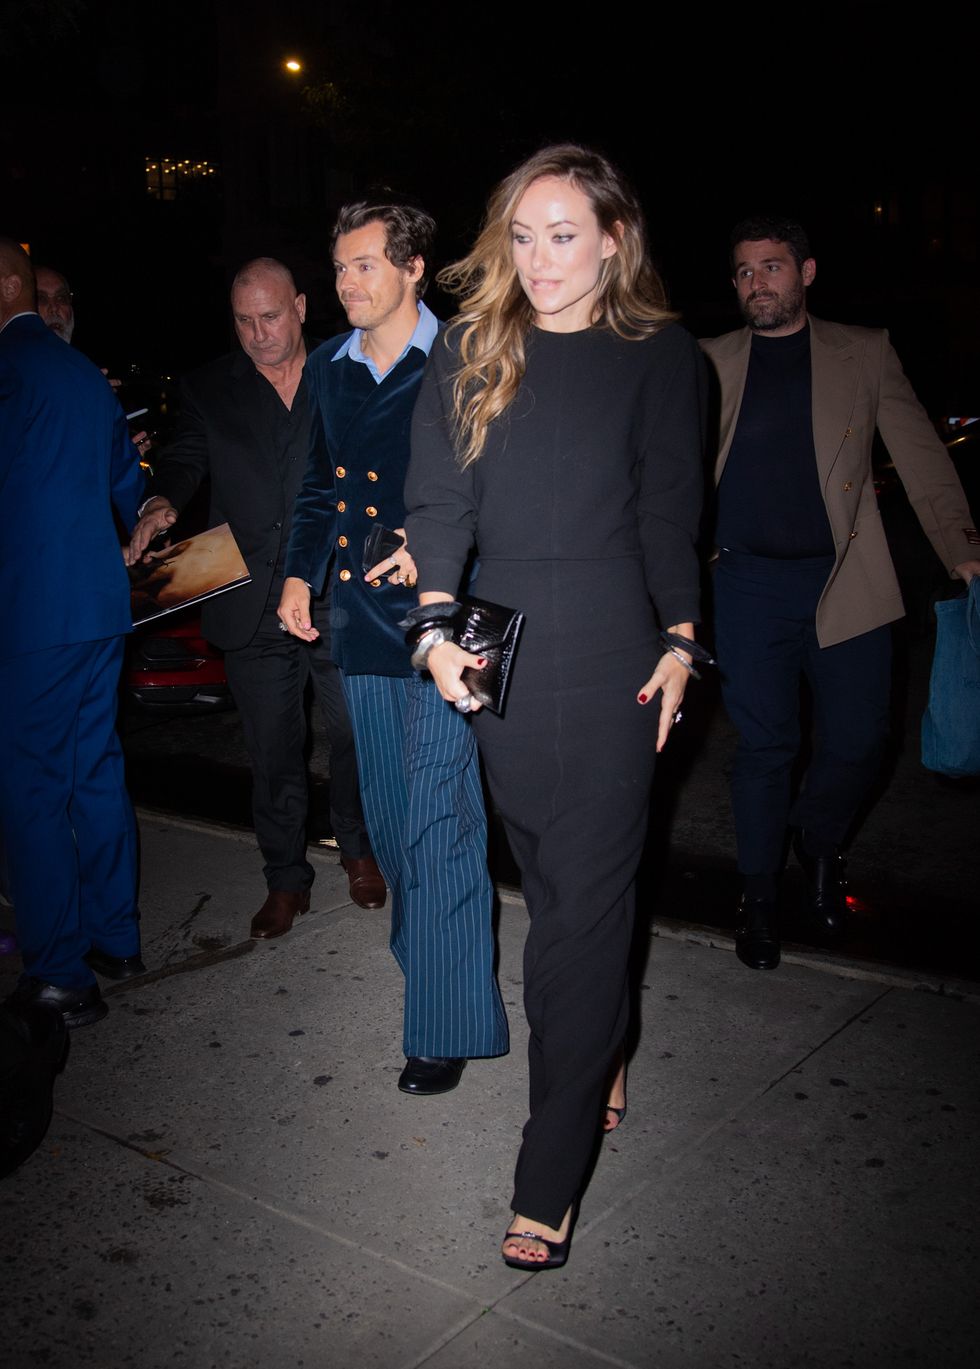 Harry Styles And Olivia Wildes Definitive Relationship Timeline